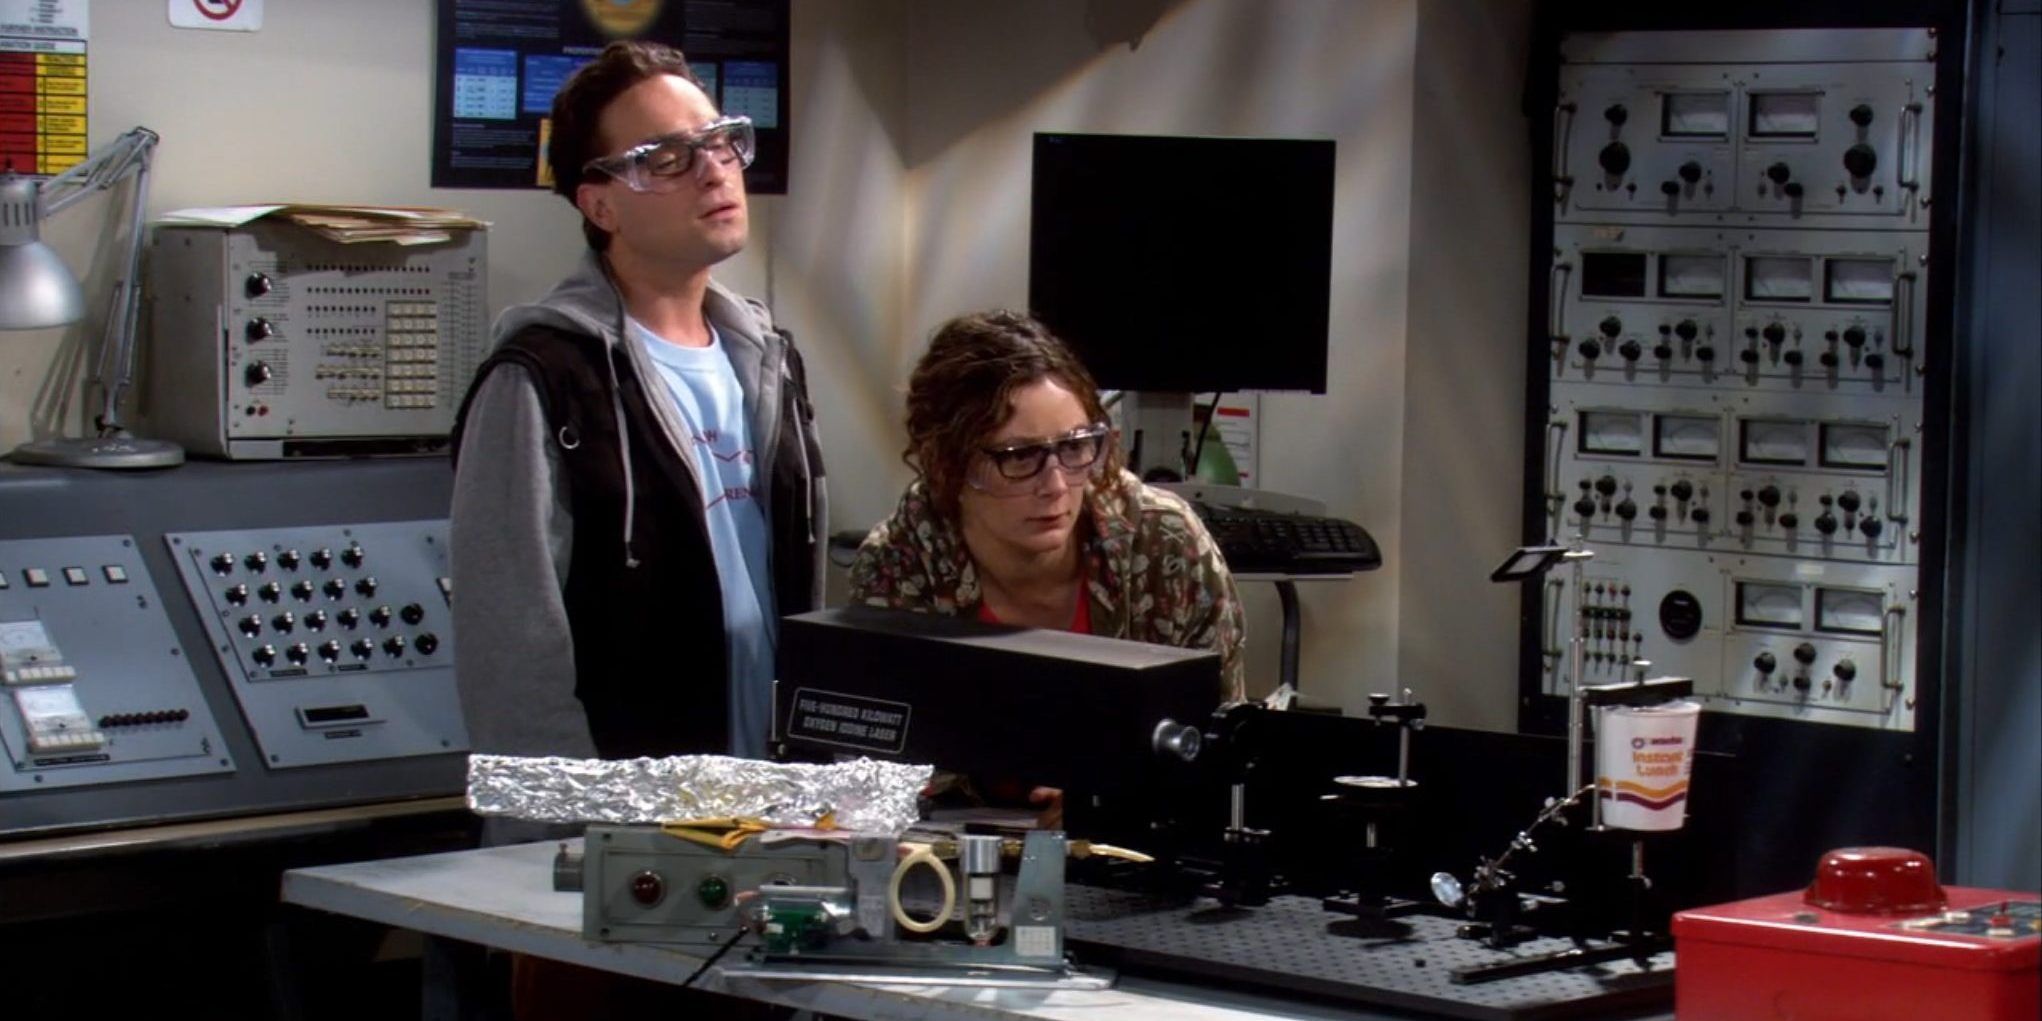 8 Amazing Ways The Big Bang Theory’s Love Of Science Inspired Reddit